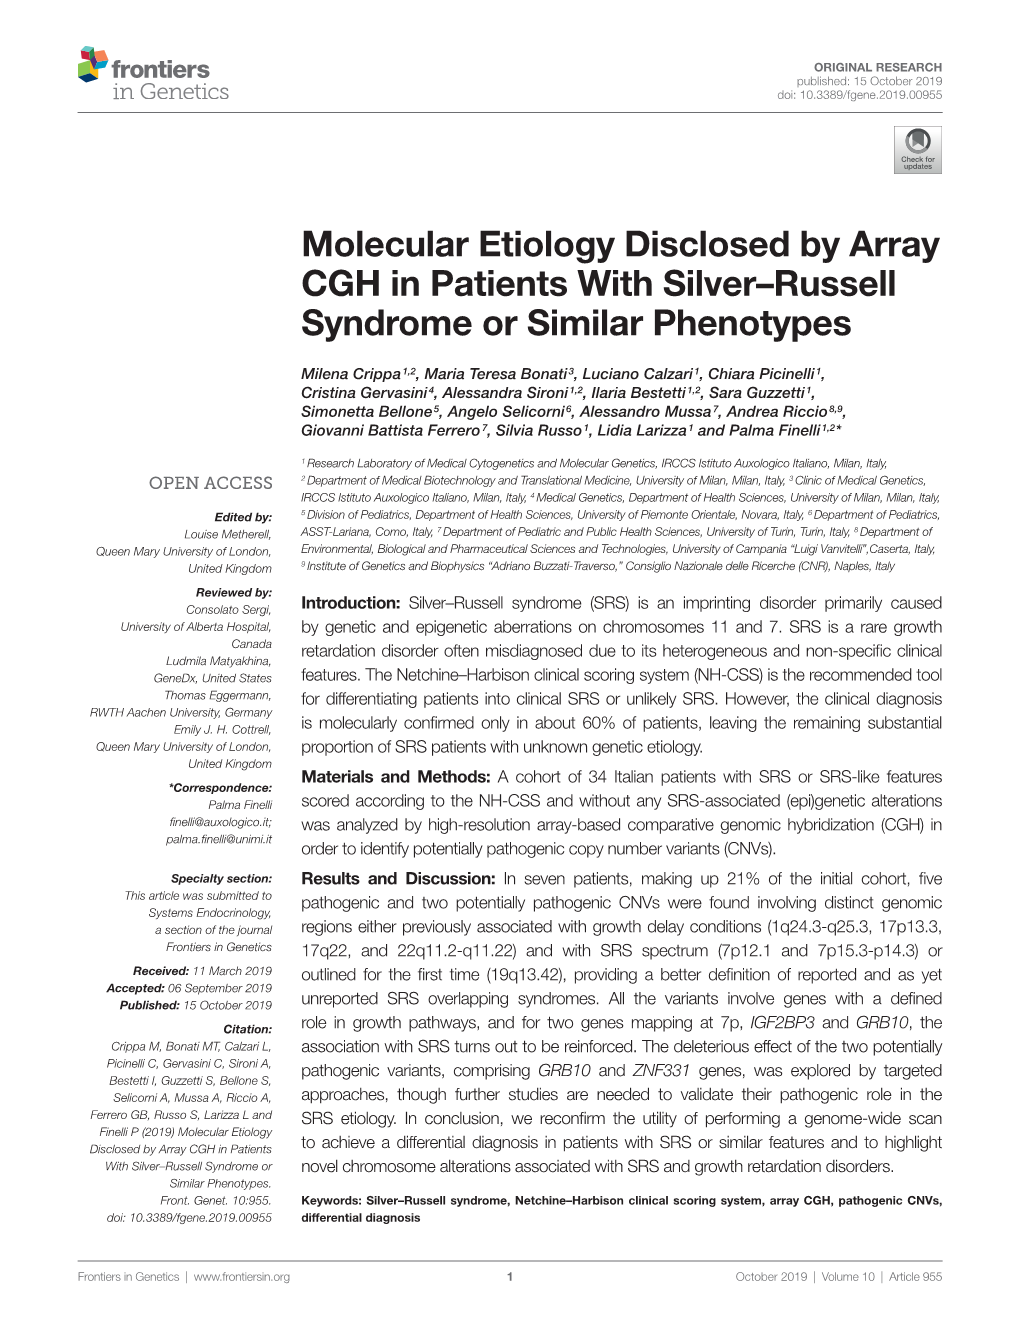 Molecular Etiology Disclosed by Array CGH in Patients with Silver–Russell Syndrome Or Similar Phenotypes